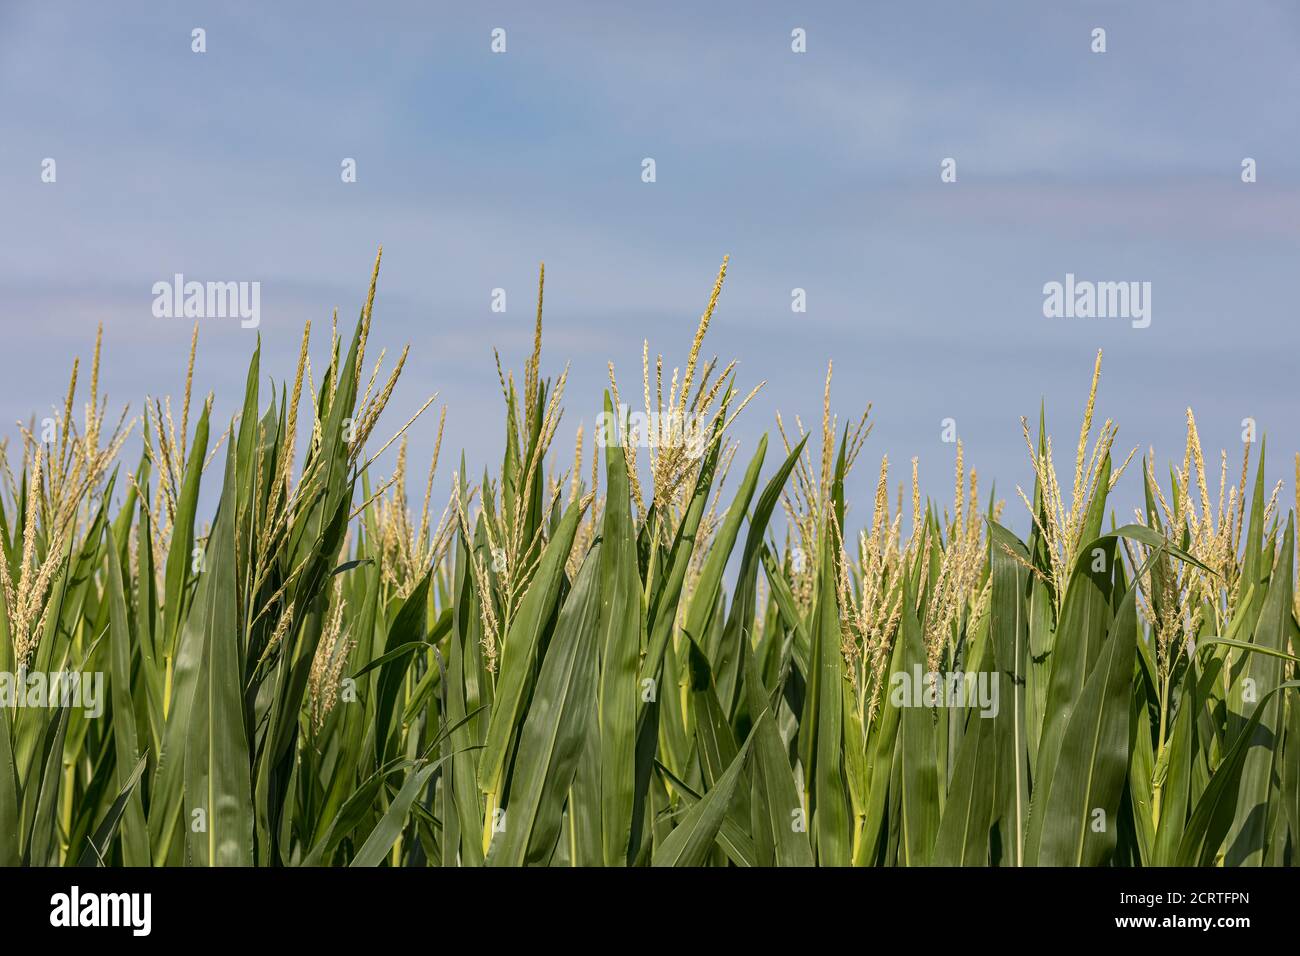 cornfield with corn tassels during summer growing season. Concept of agriculture, agriscience, agribusiness and agronomy Stock Photo